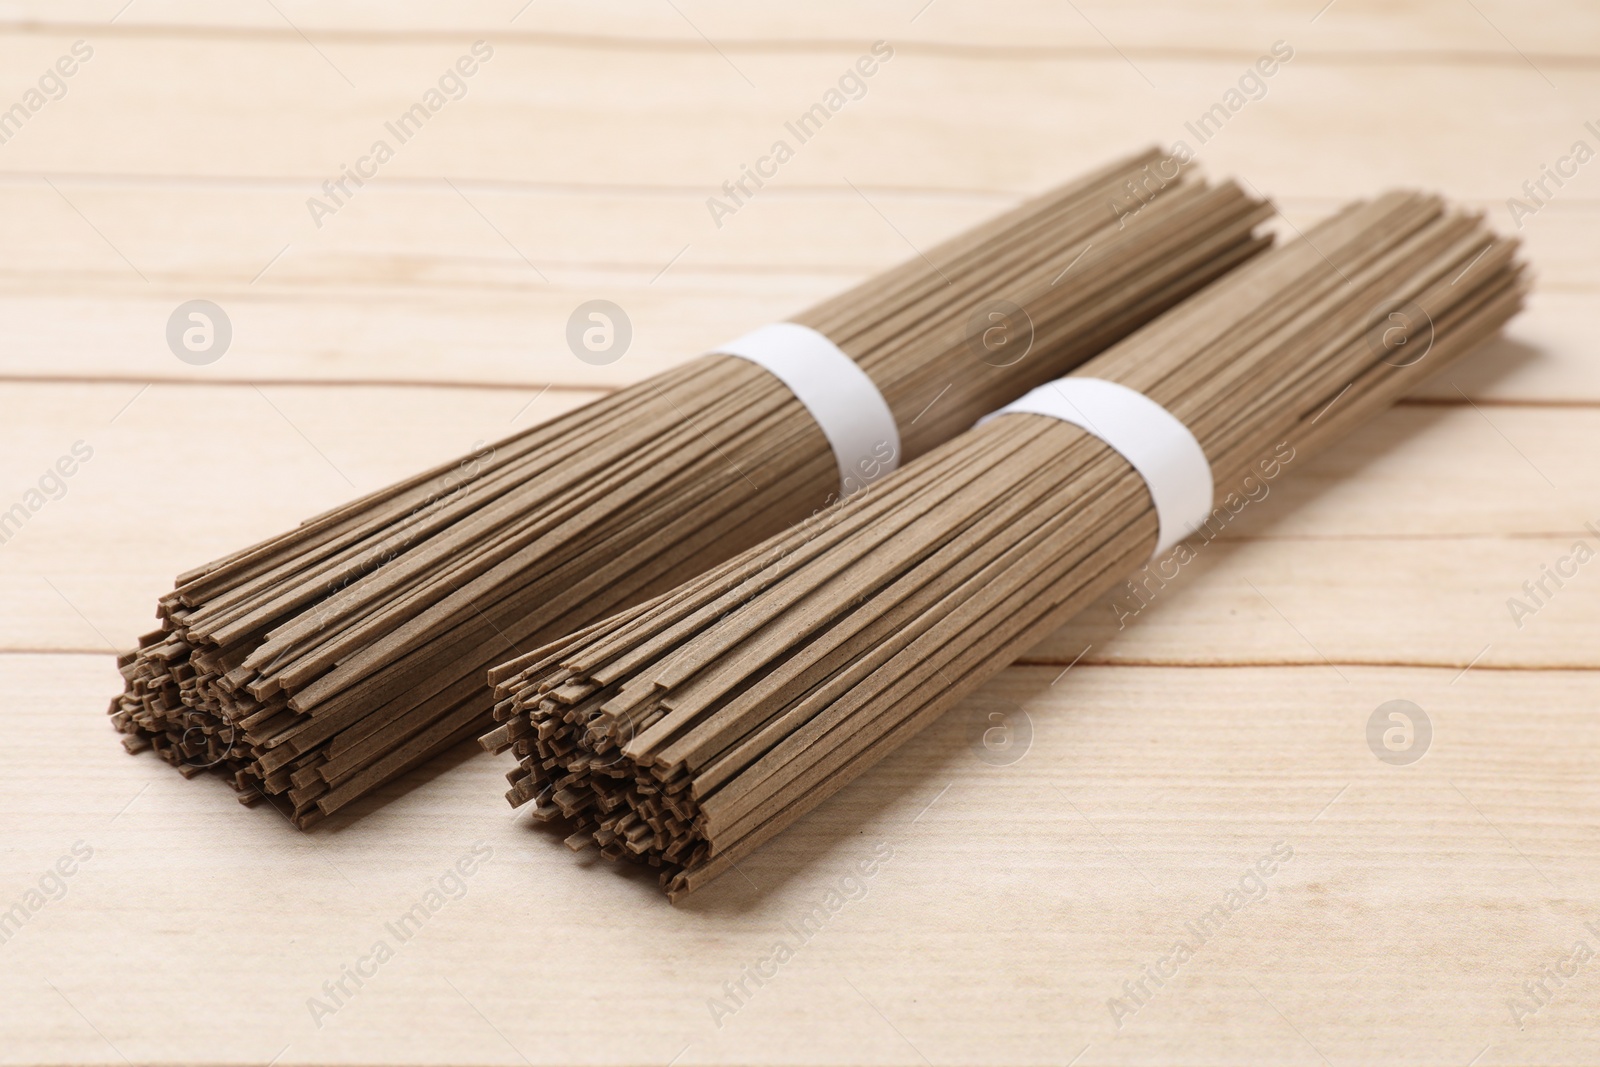 Photo of Uncooked buckwheat noodles (soba) on light wooden table